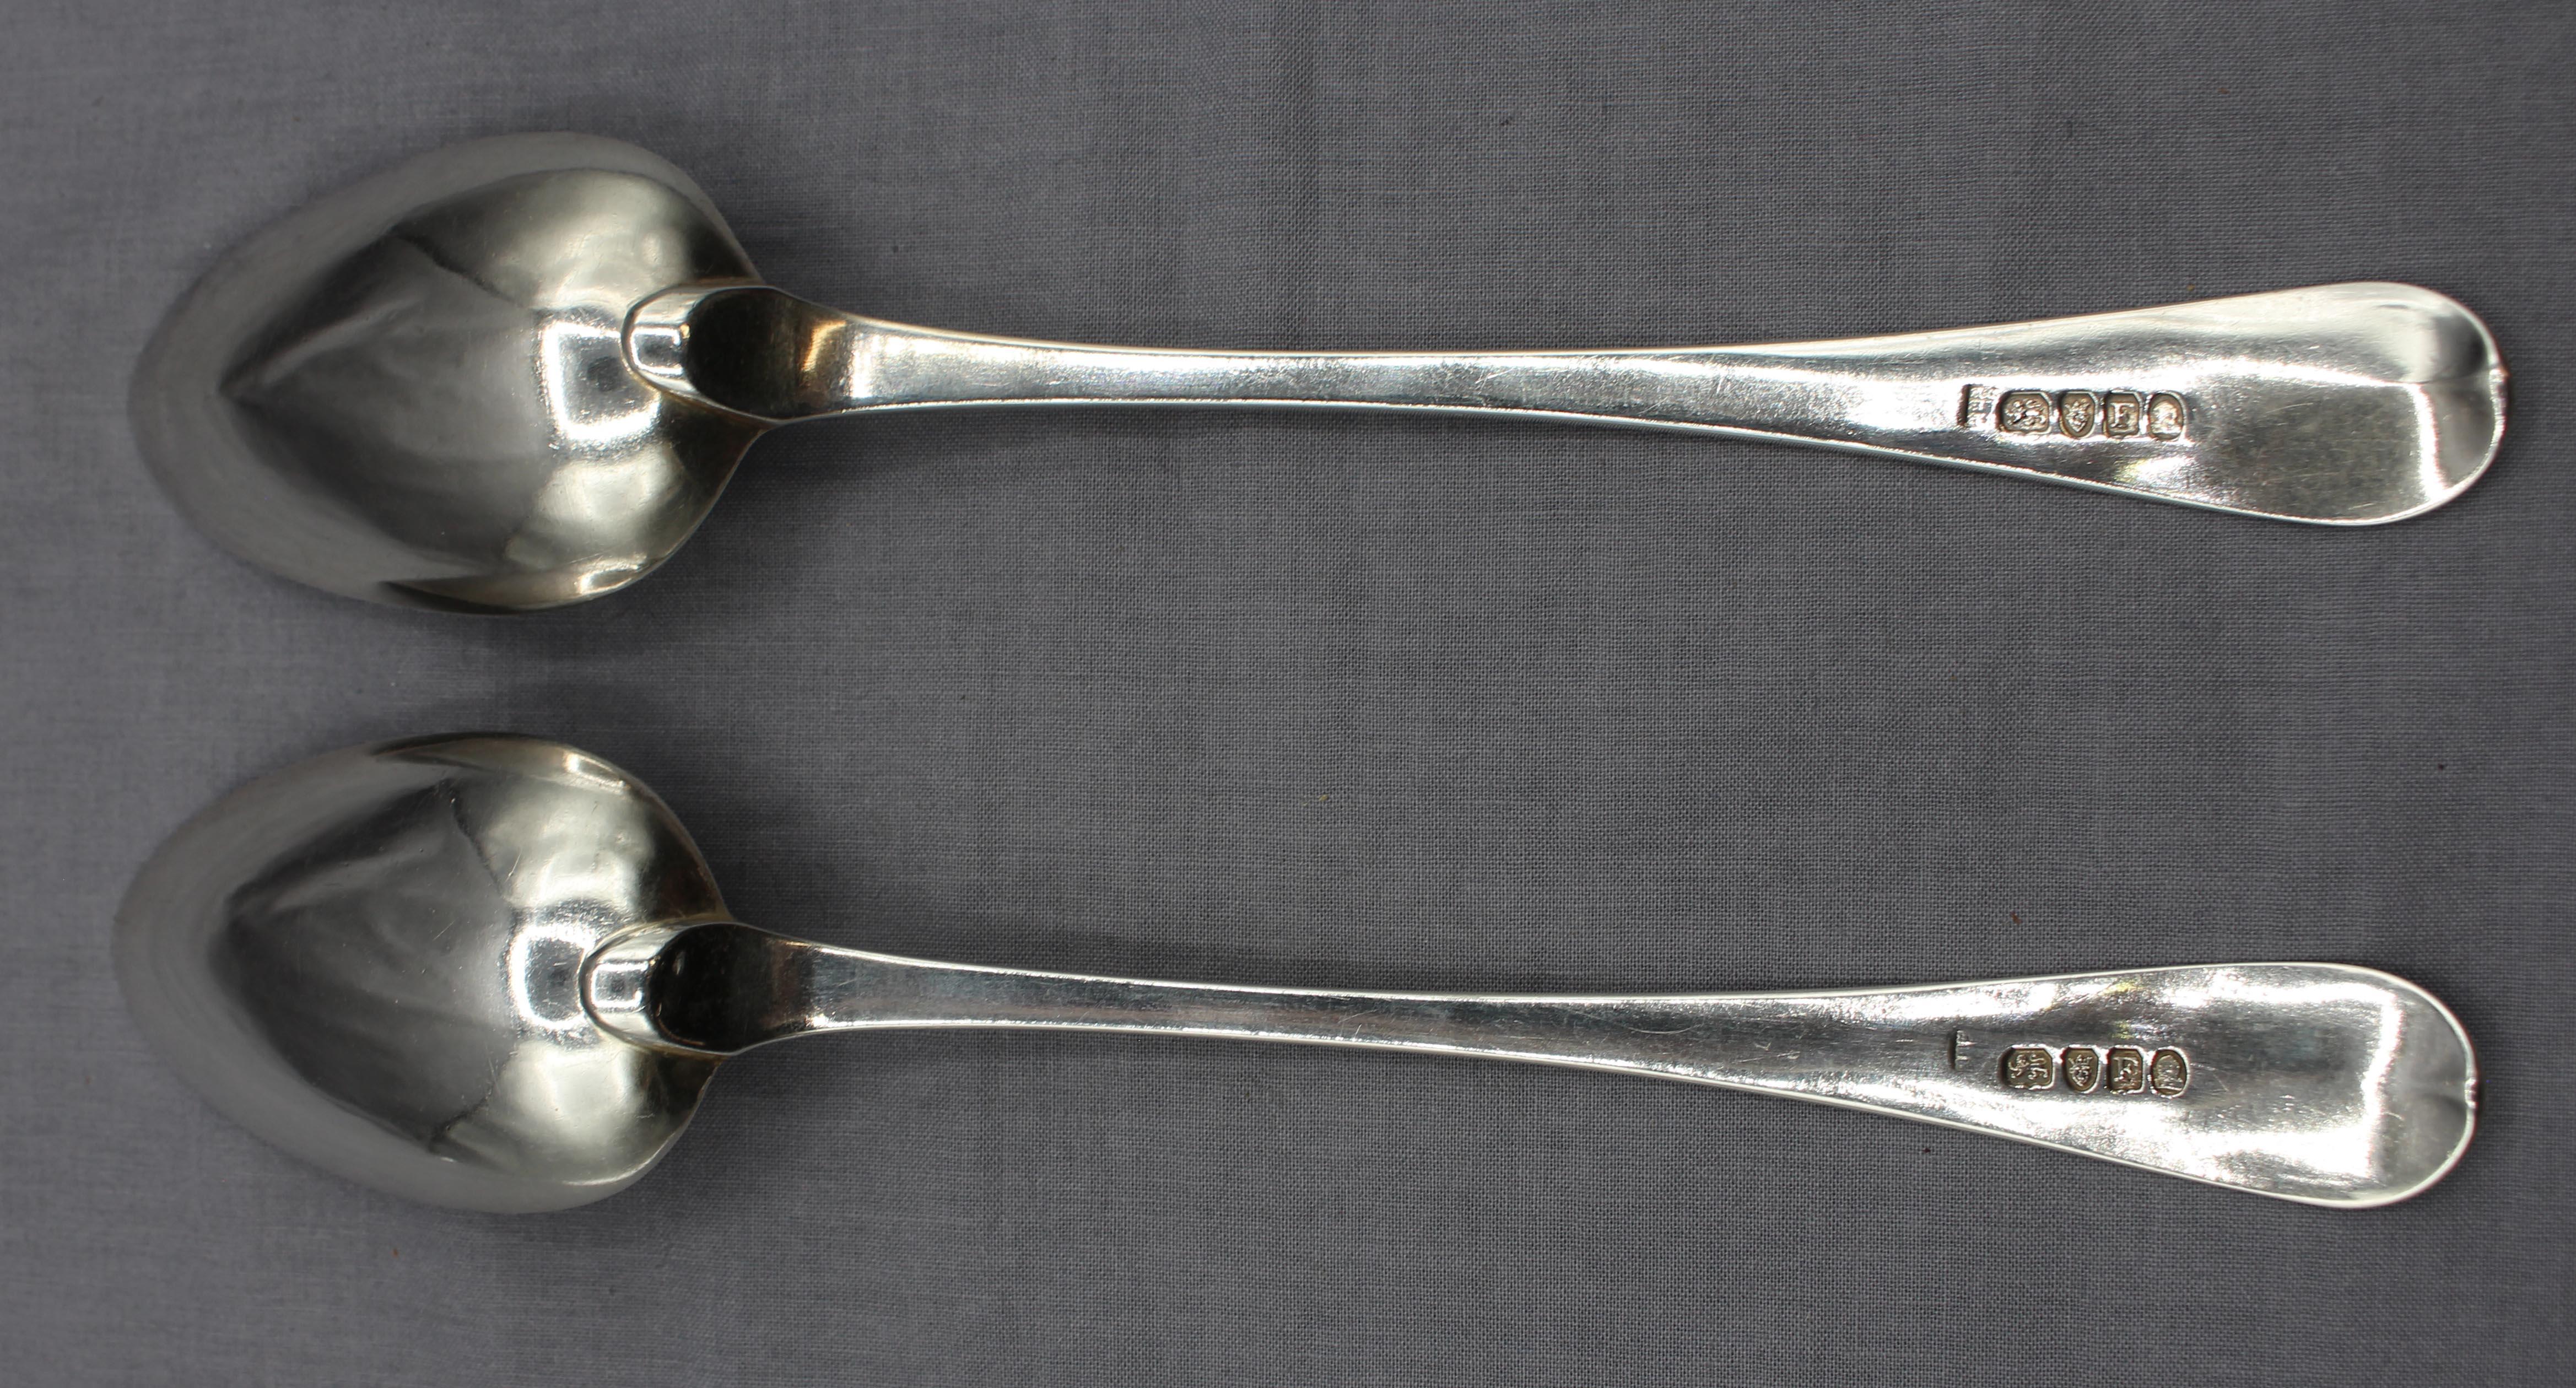 Pair of sterling silver Peter, Anne & William Bateman tablespoons, London, 1801. Old English Thread pattern with a 